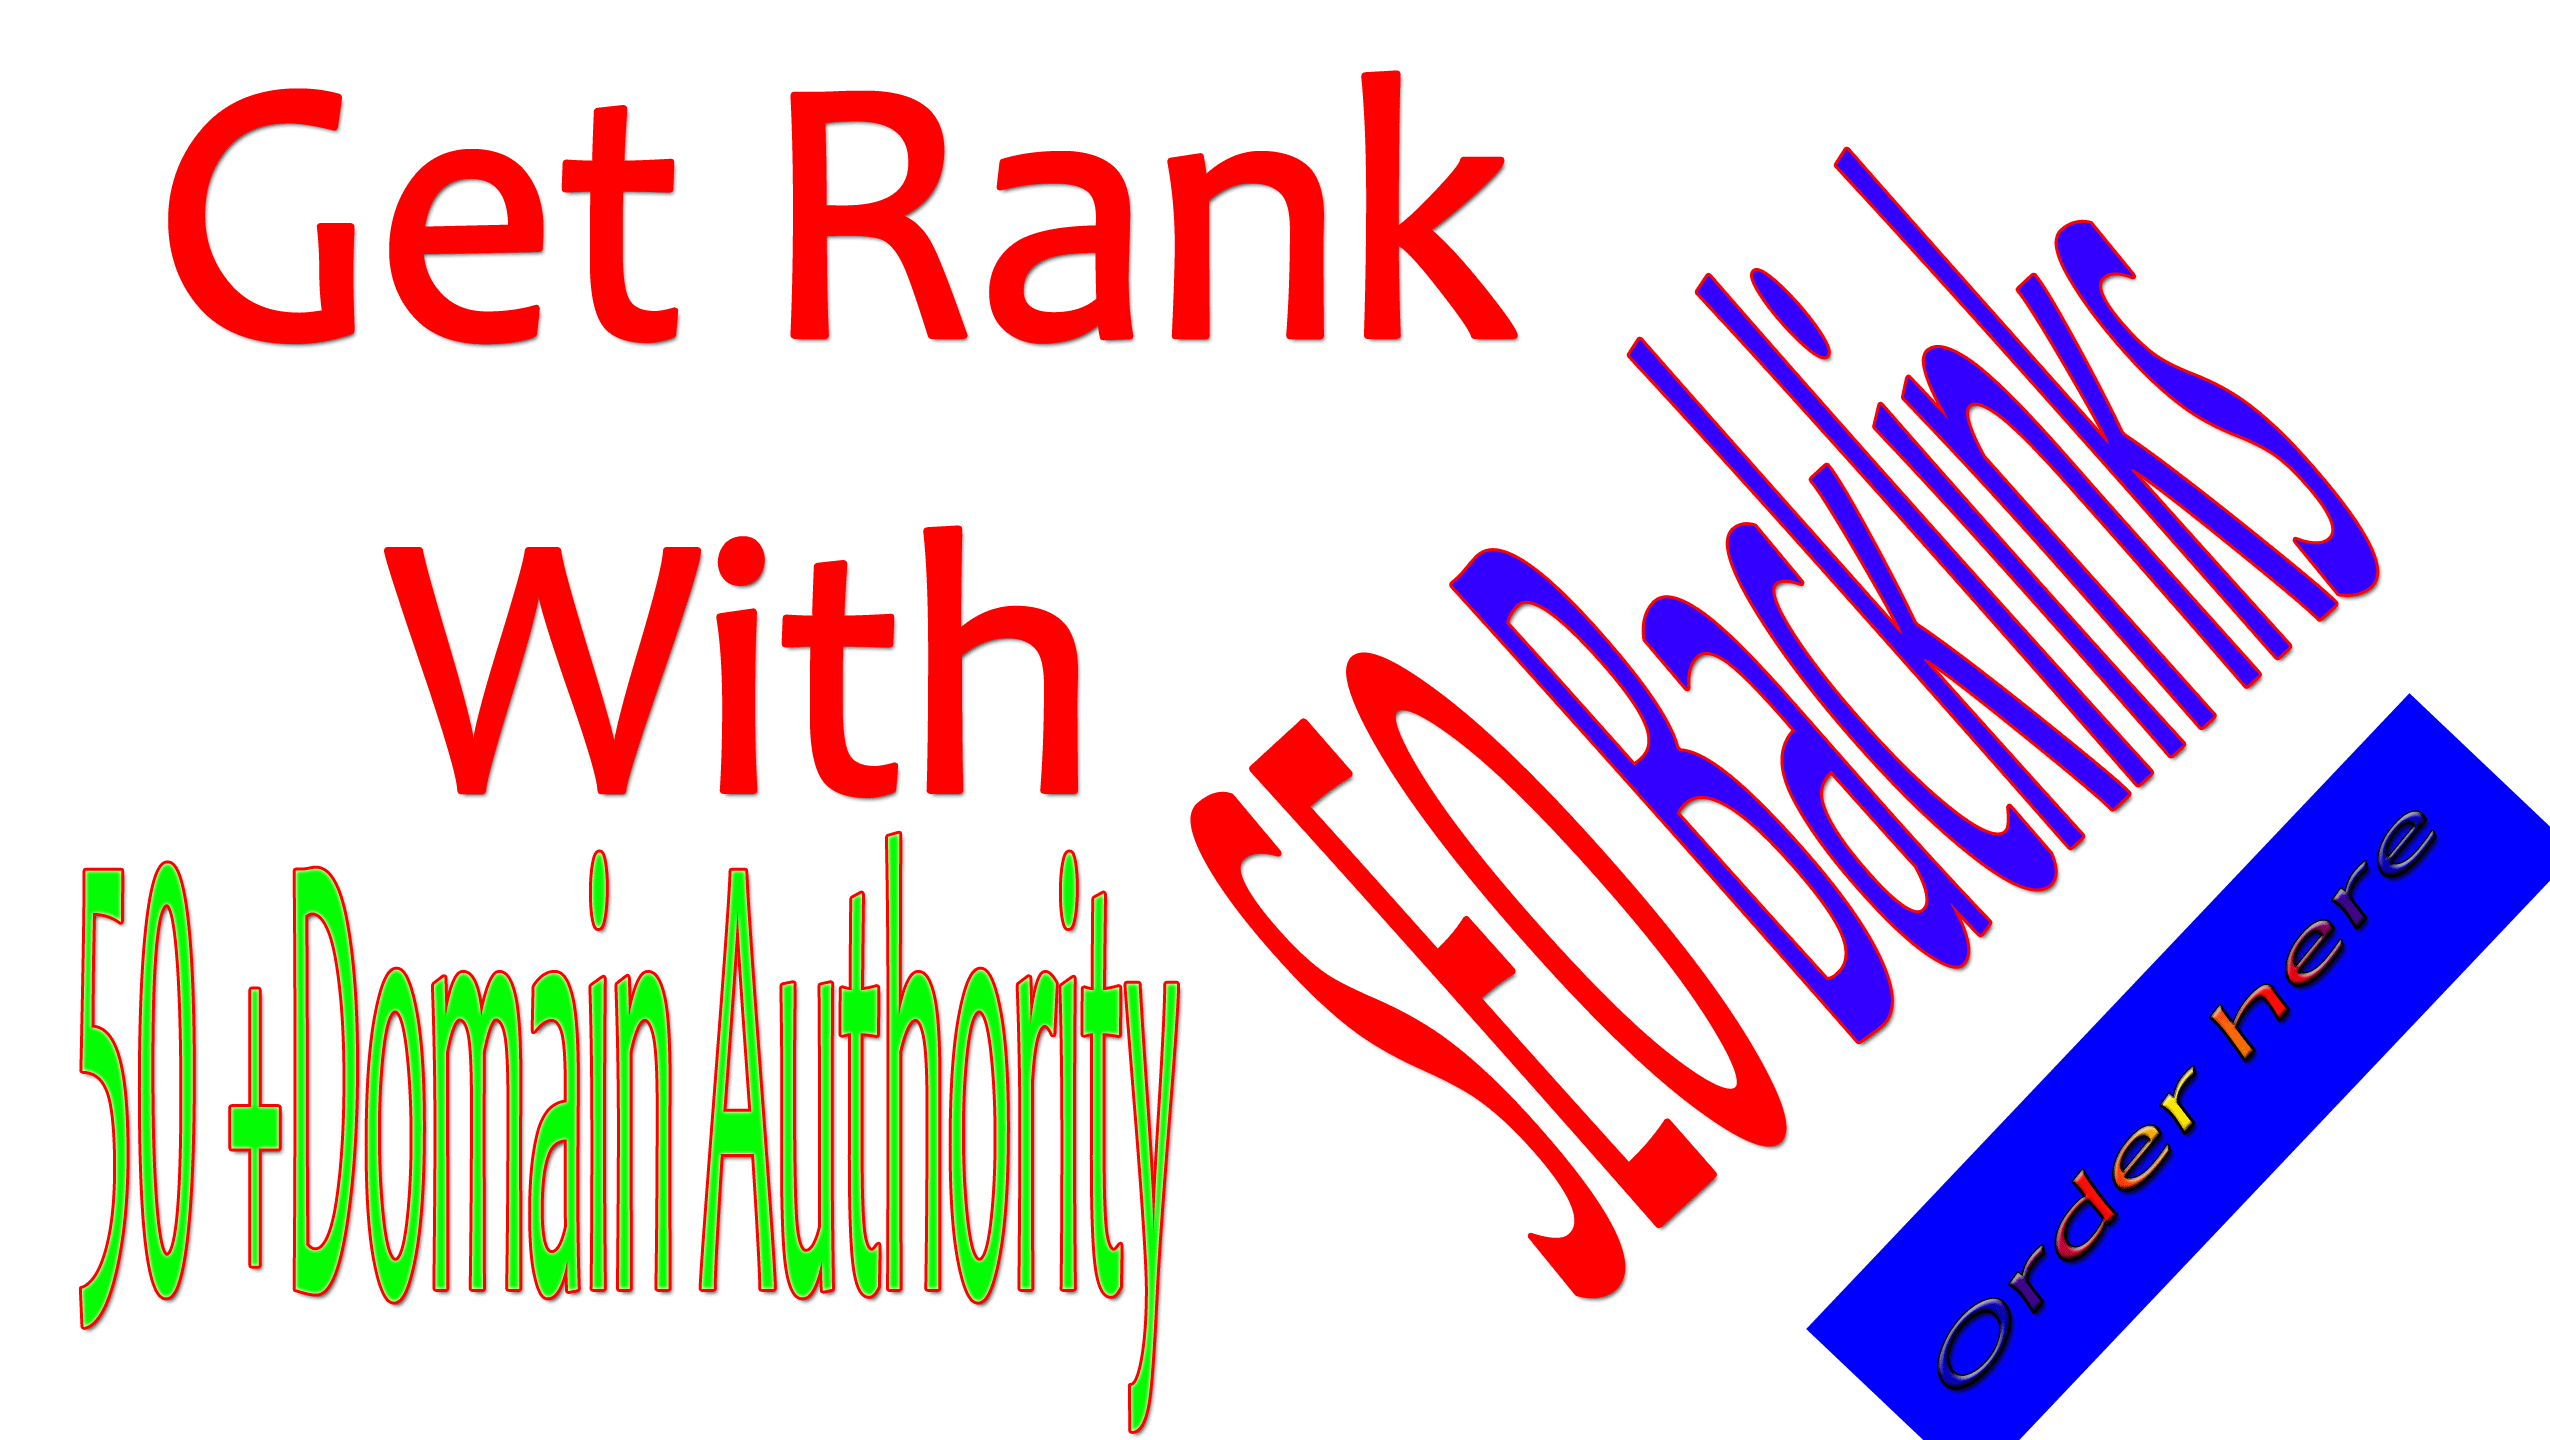 Get Rank with 100+ highest Quality links on 50 +Domain Authority 